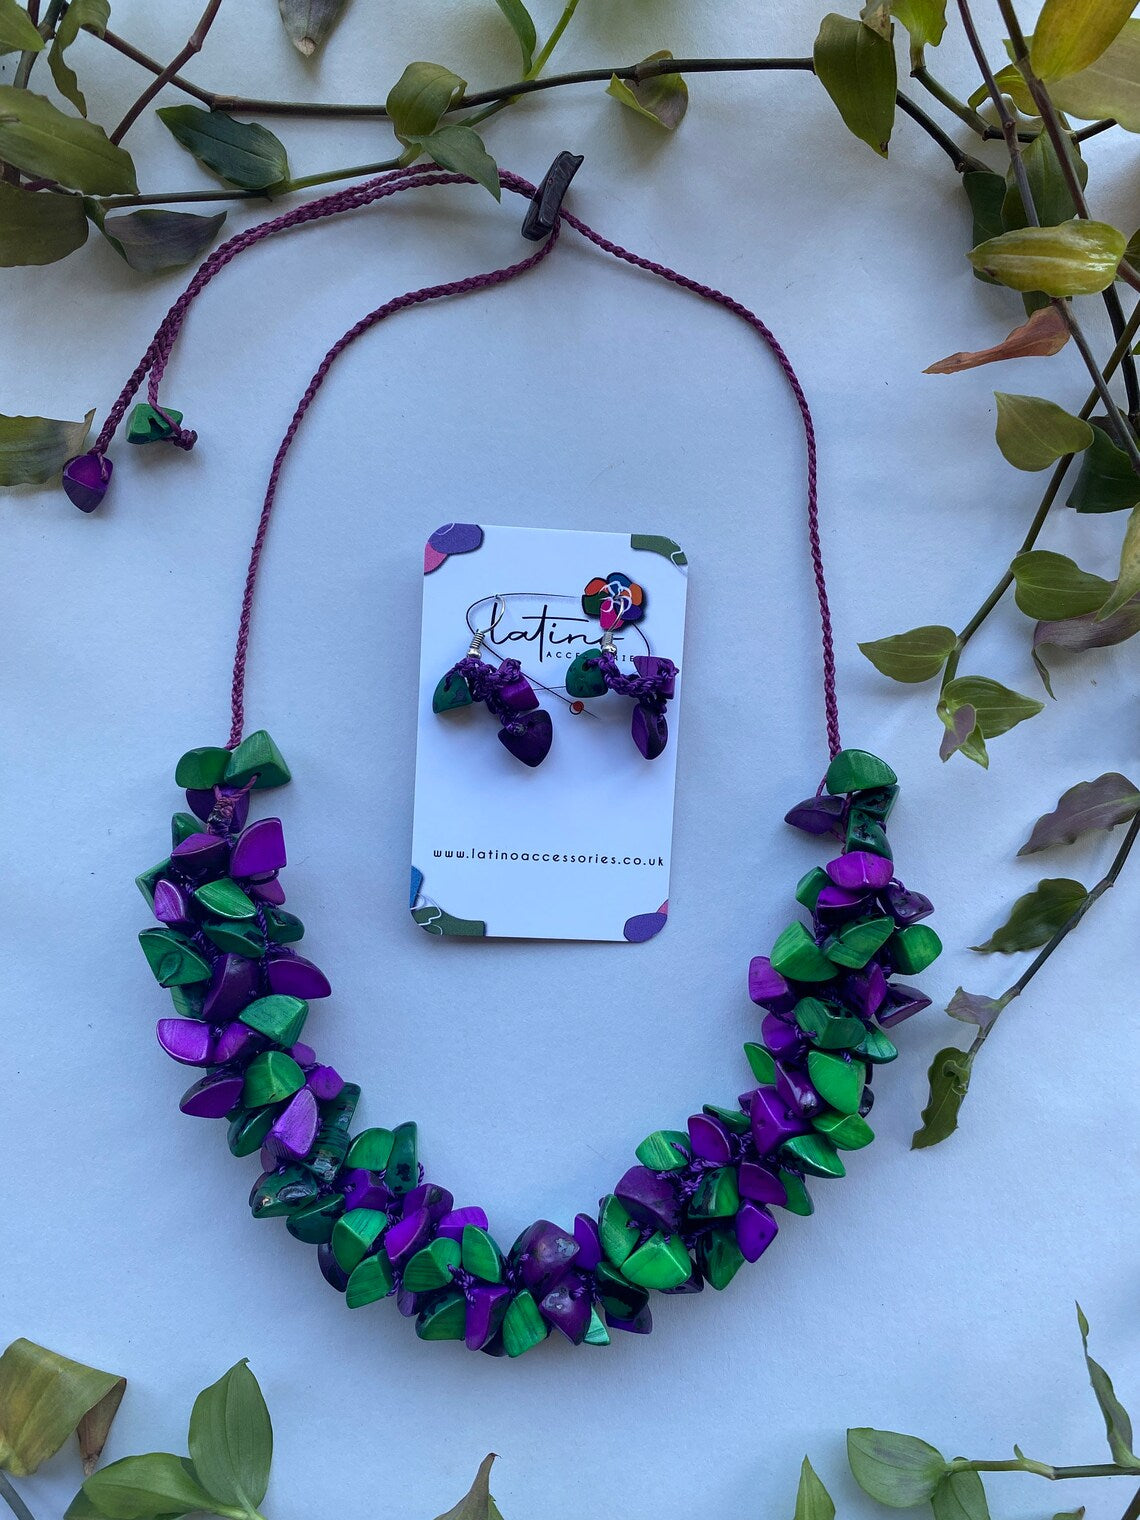 Green and purple trocitos necklace set